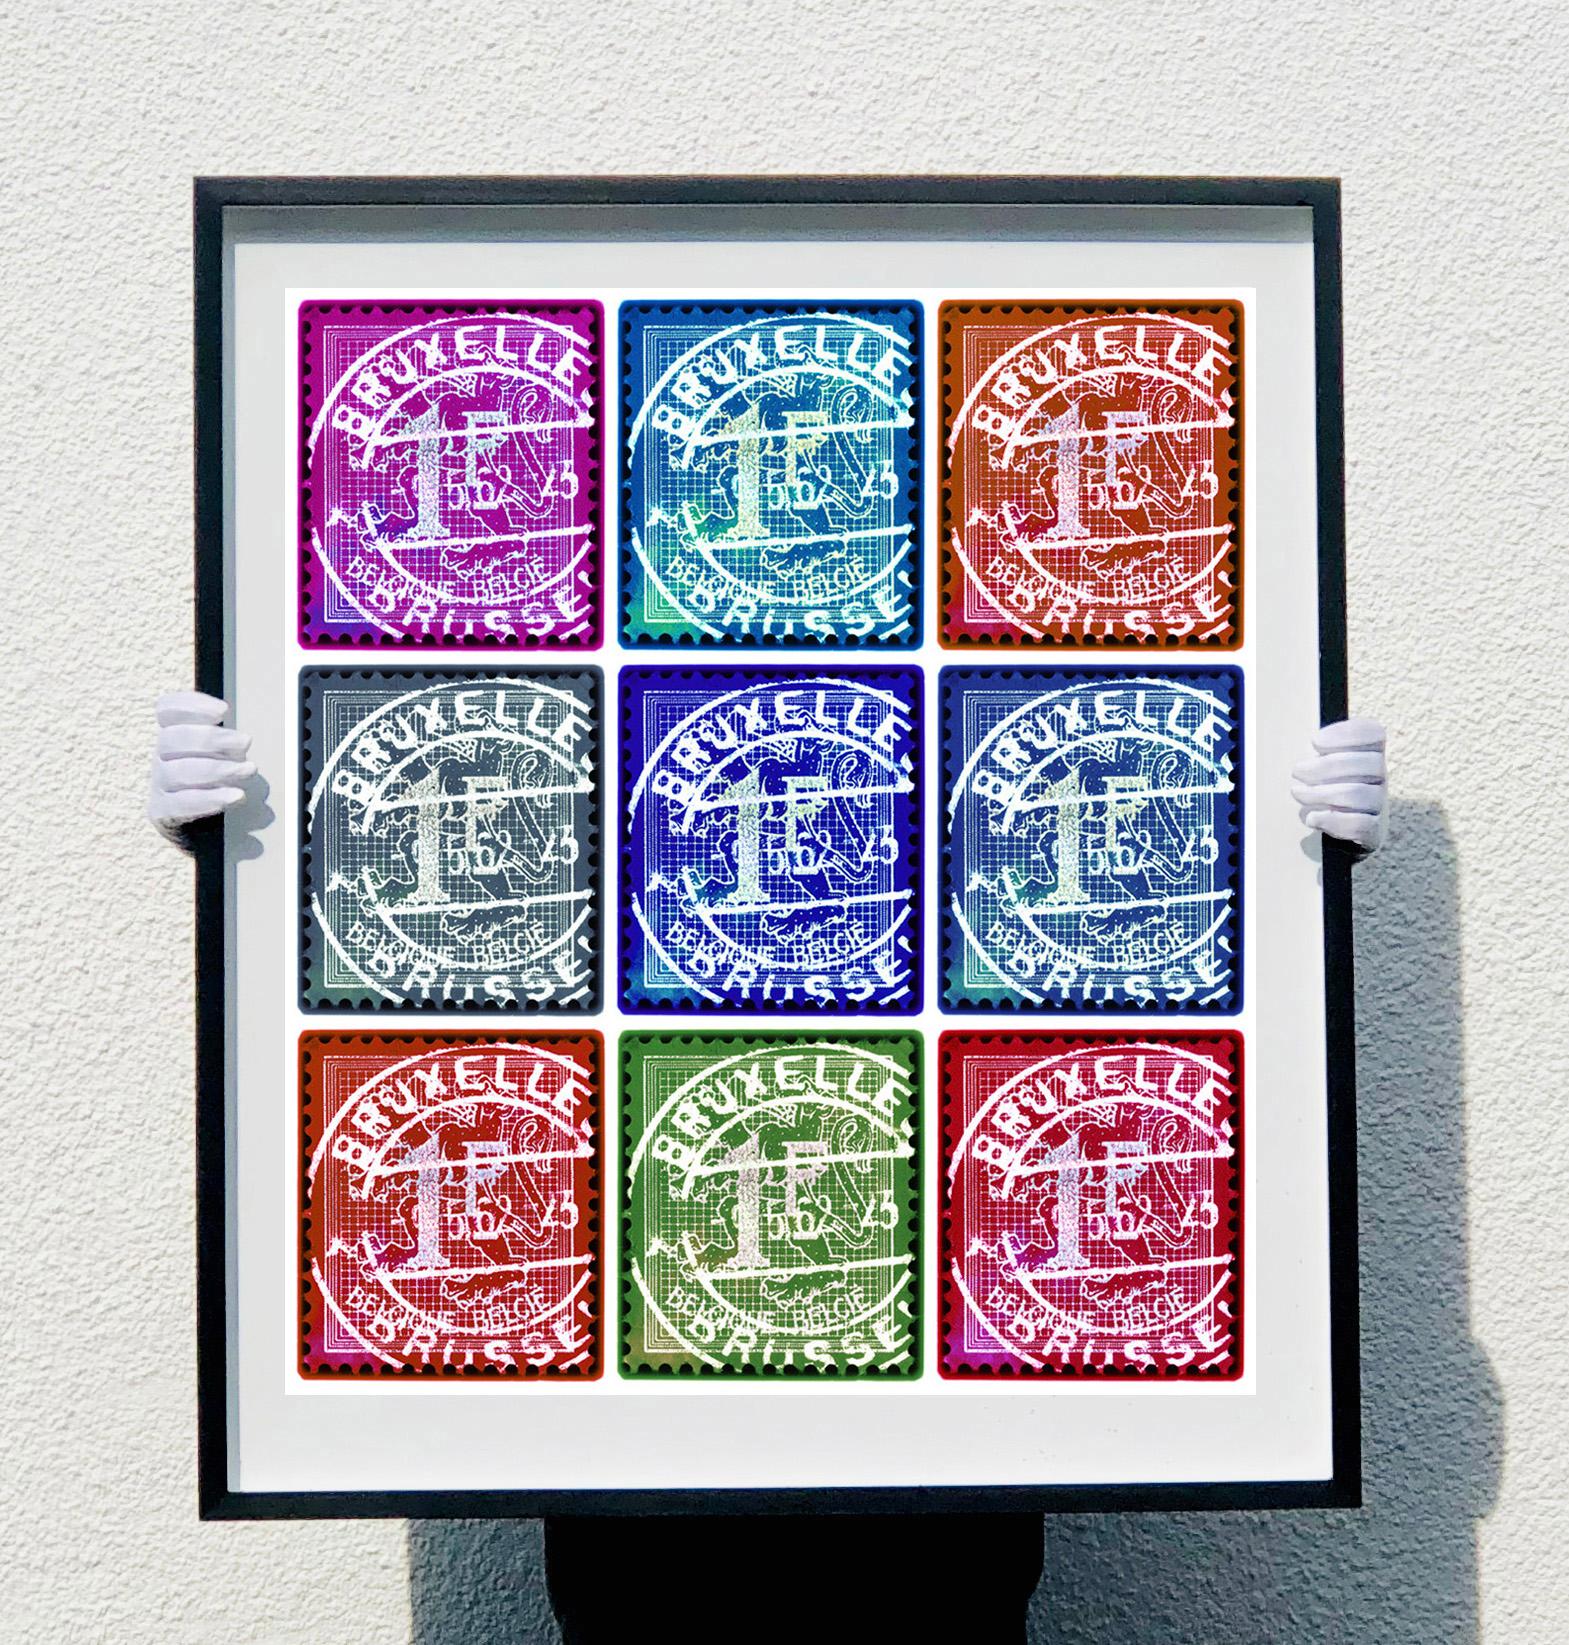 Stamp Collection, Lion of Flanders (Multi-Color Mosaic Brussels Stamps)  - Pop Art Photograph by Heidler & Heeps